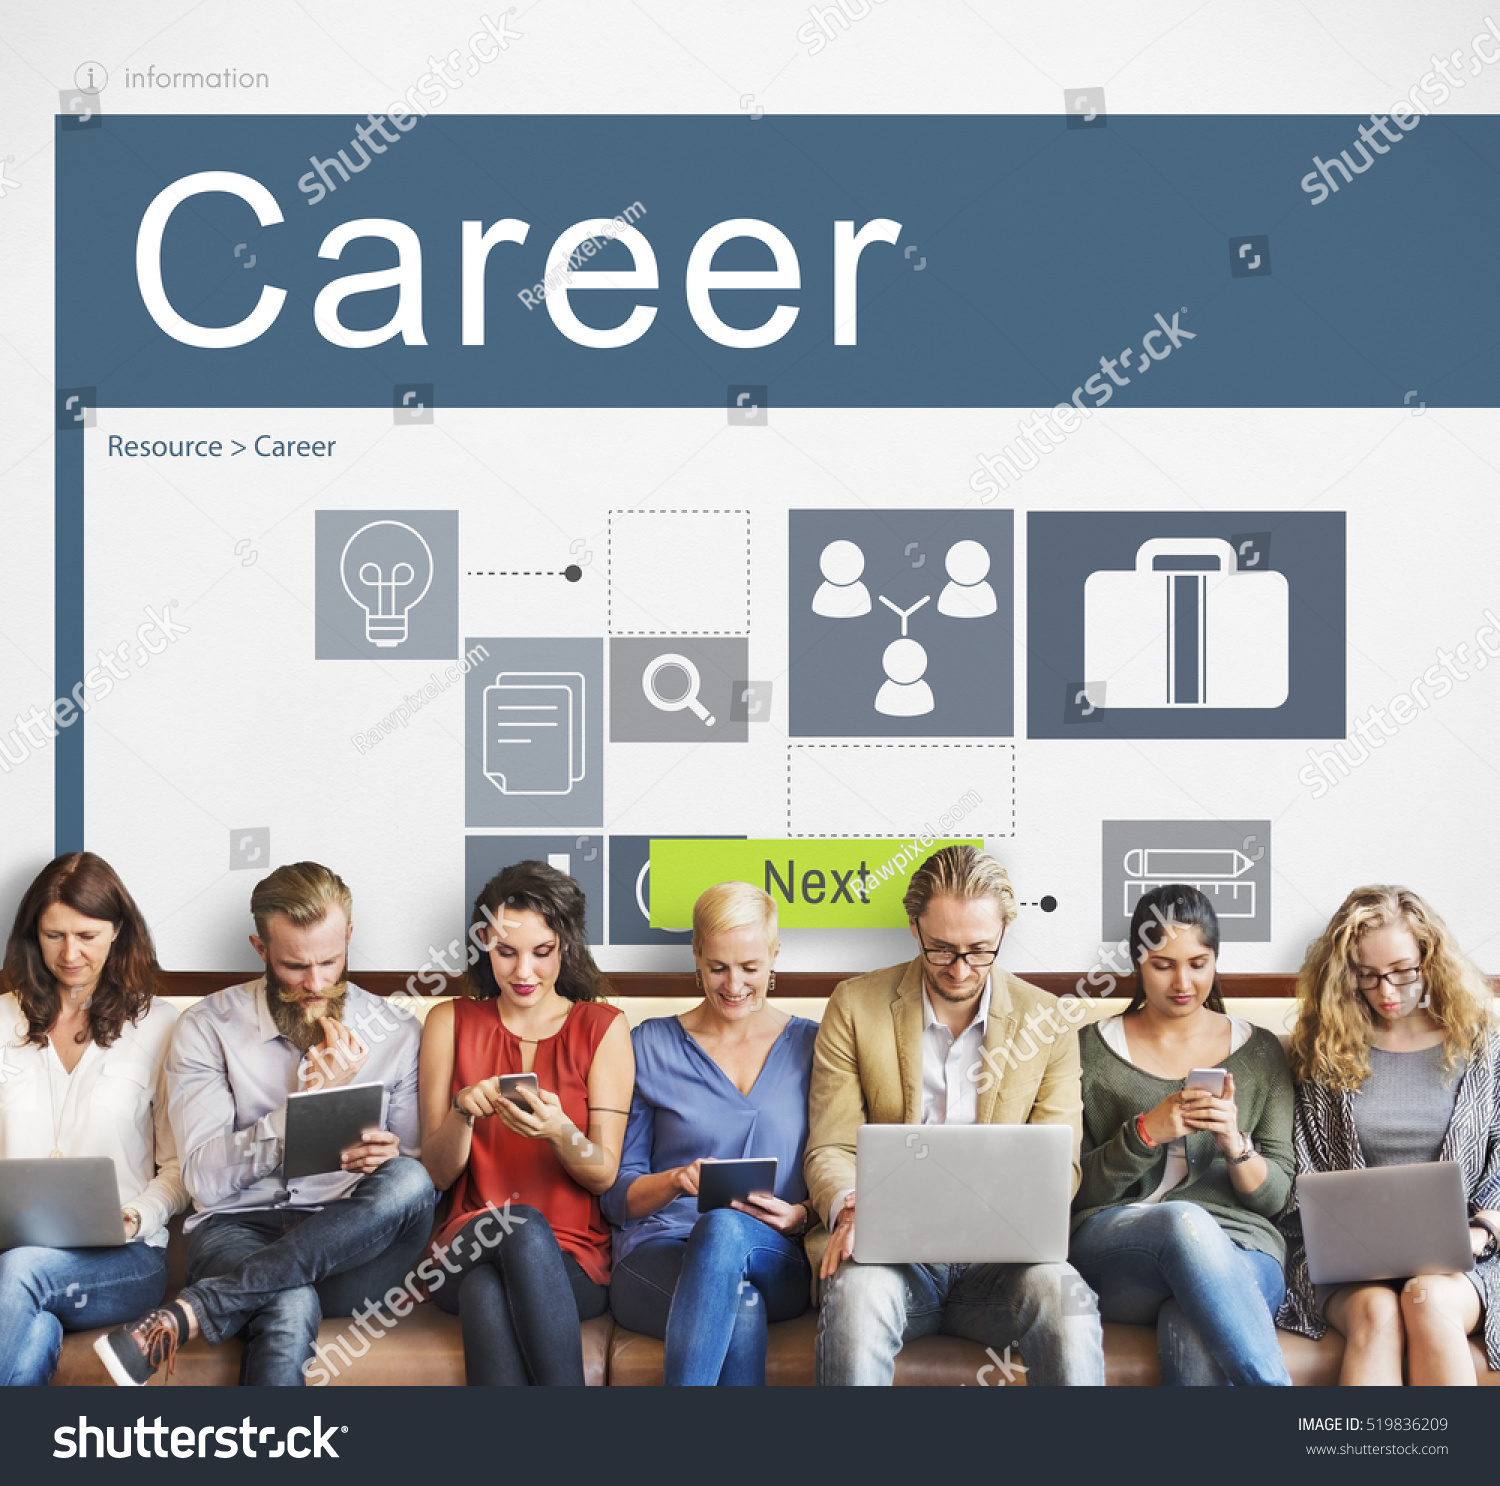 Career Occupations Recruitment Job Search Concept #519836209